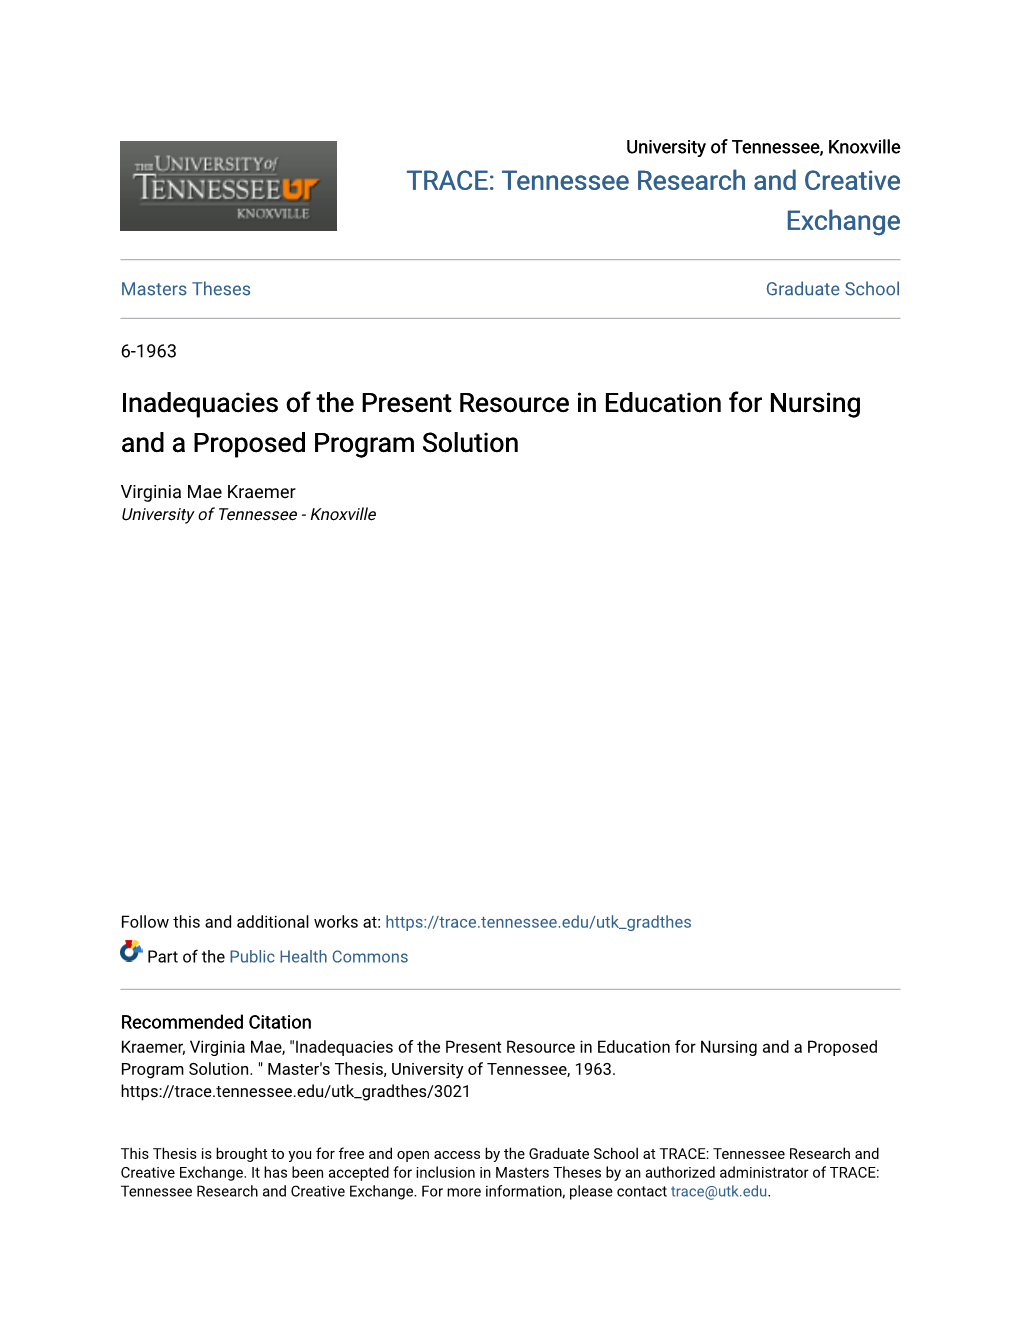 Inadequacies of the Present Resource in Education for Nursing and a Proposed Program Solution